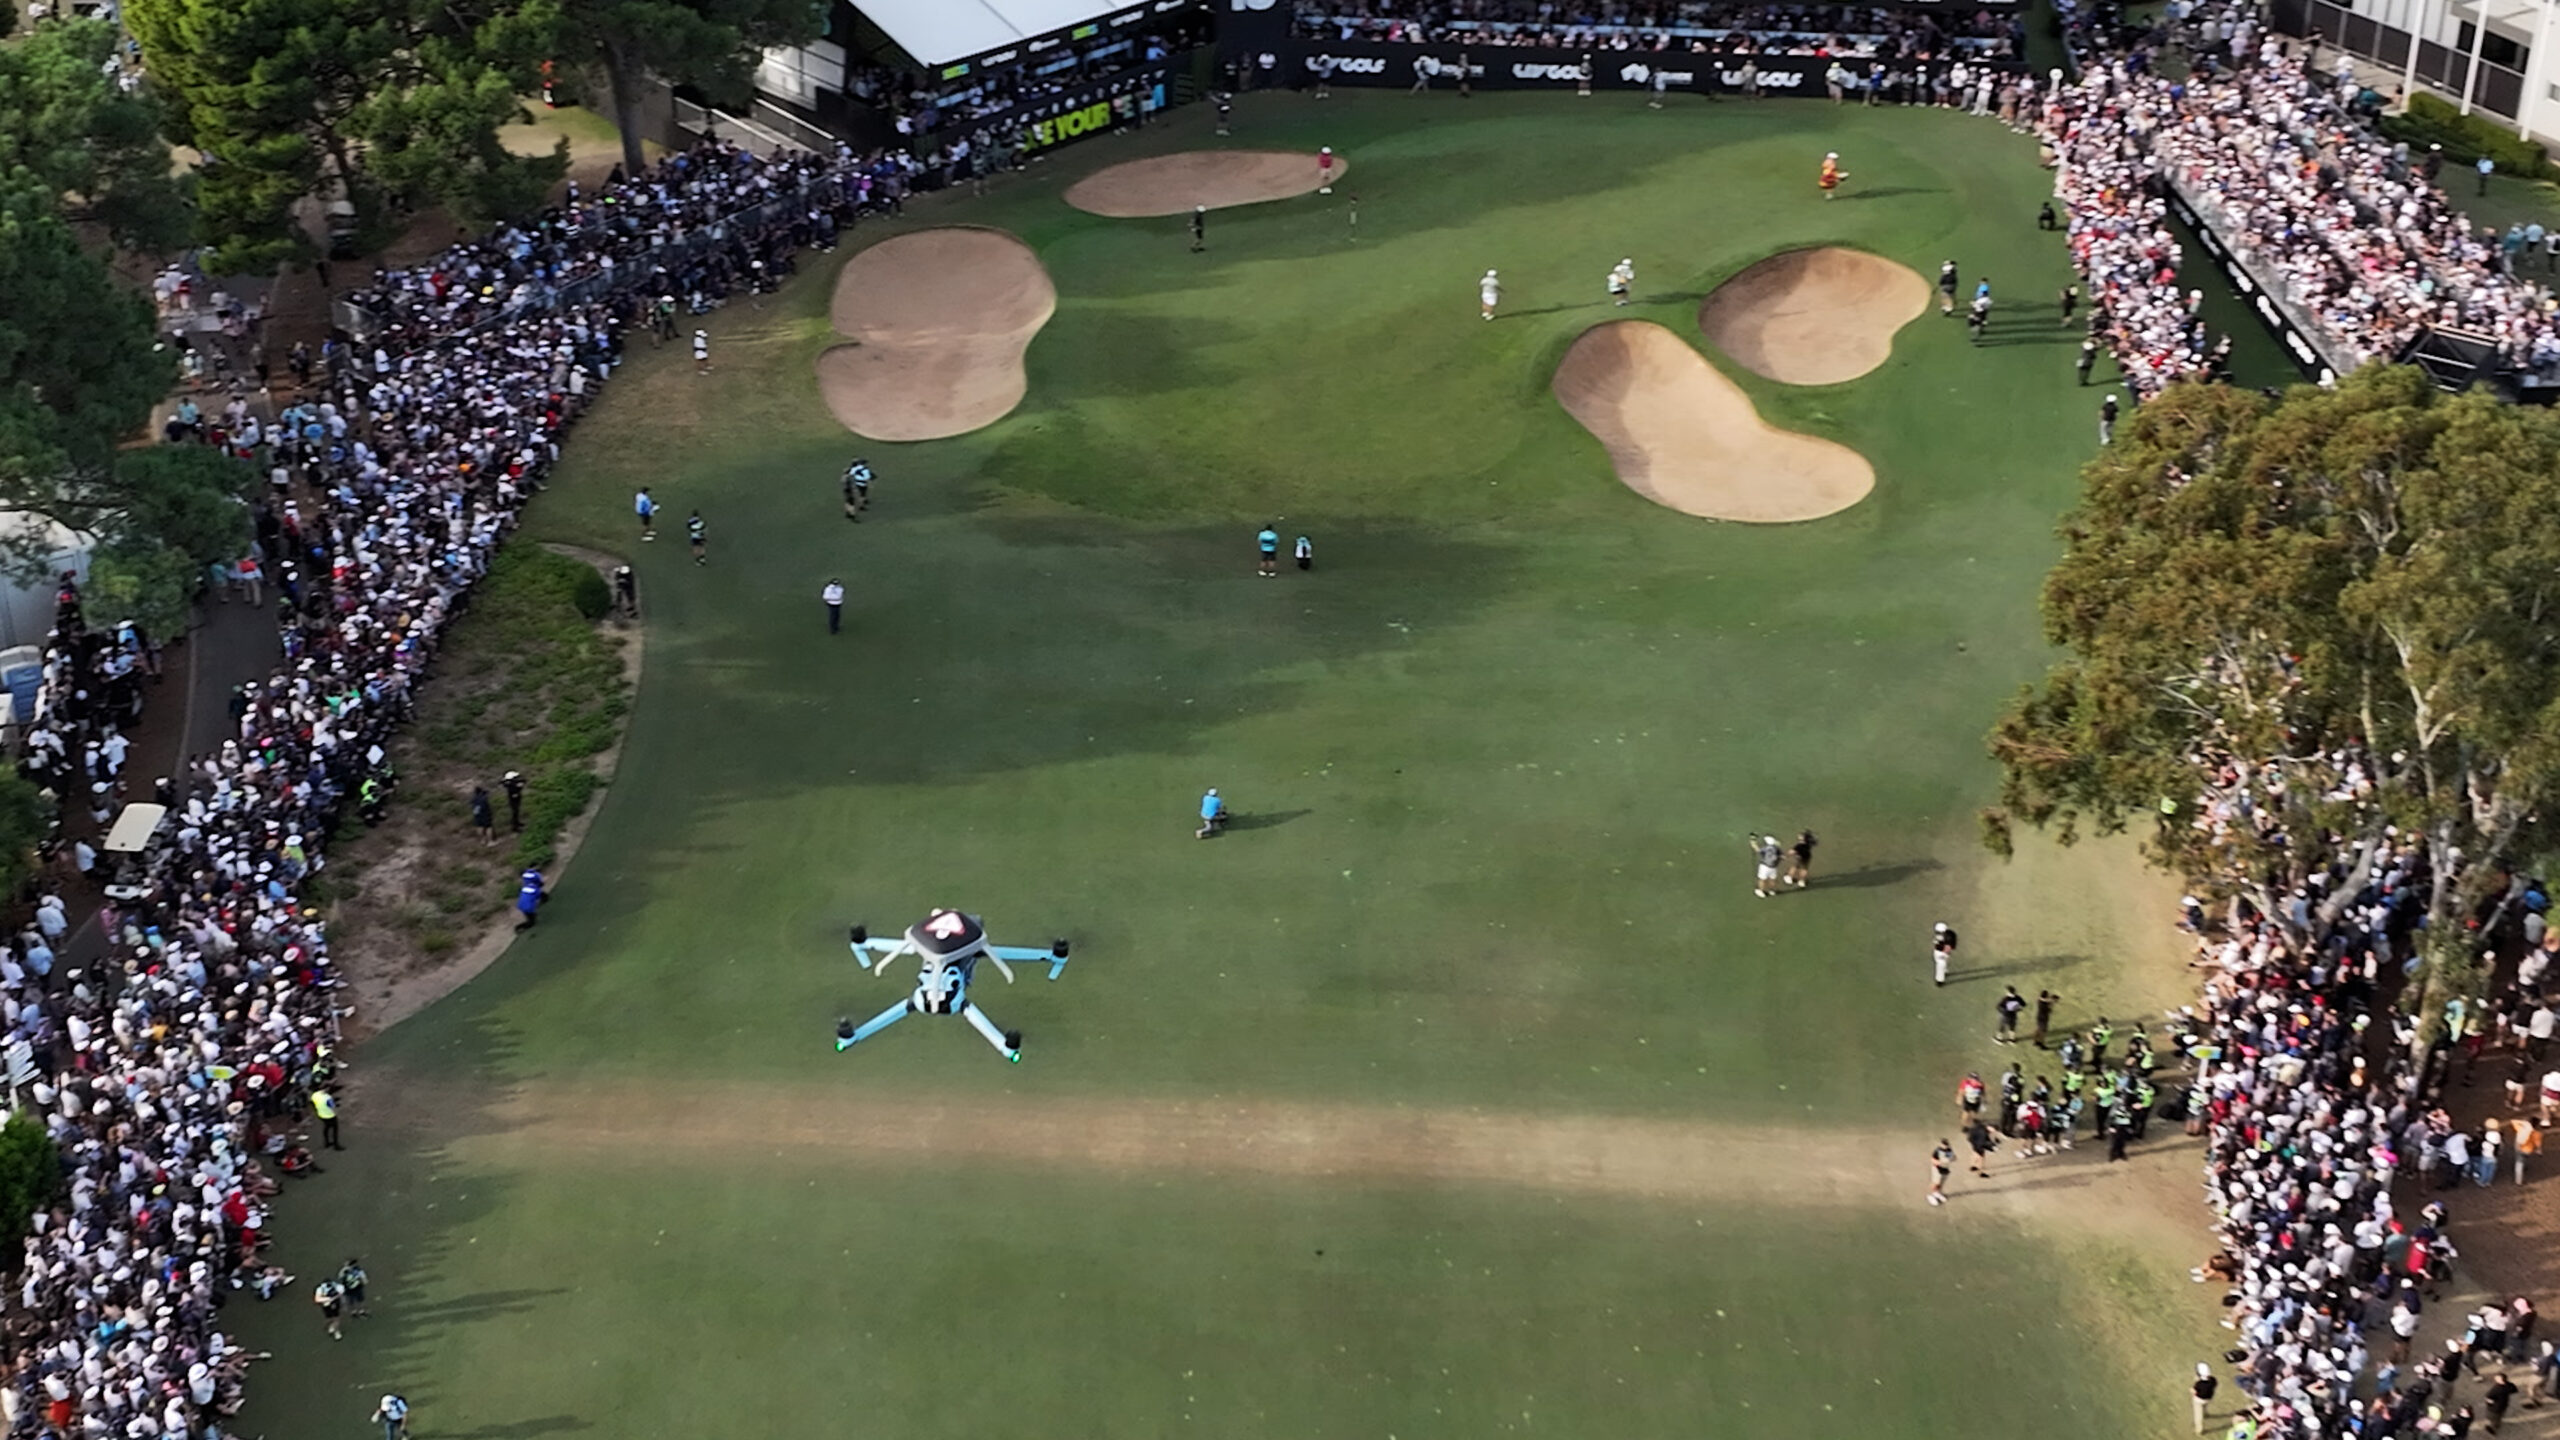 Beverly Hills Aerials, LIV Golf Make Australian-Broadcast History by Flying Live Drones Over People in Adelaide